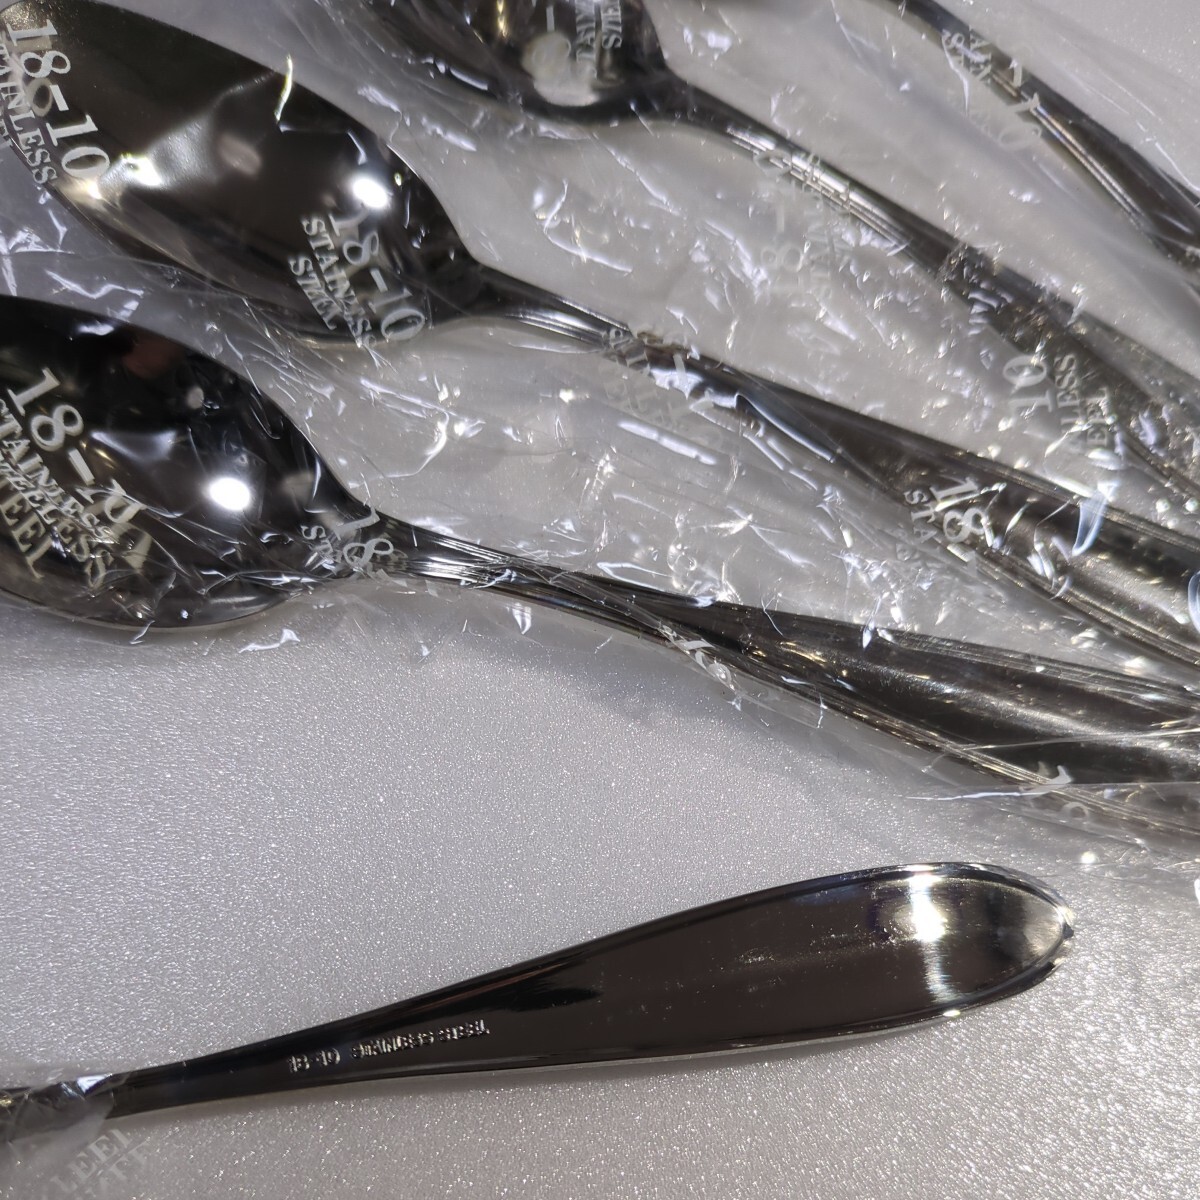  unused 18-10 stainless steel spoon (17.5)5pc mirror finishing cutlery soup * curry *pi rough kitchen miscellaneous goods 